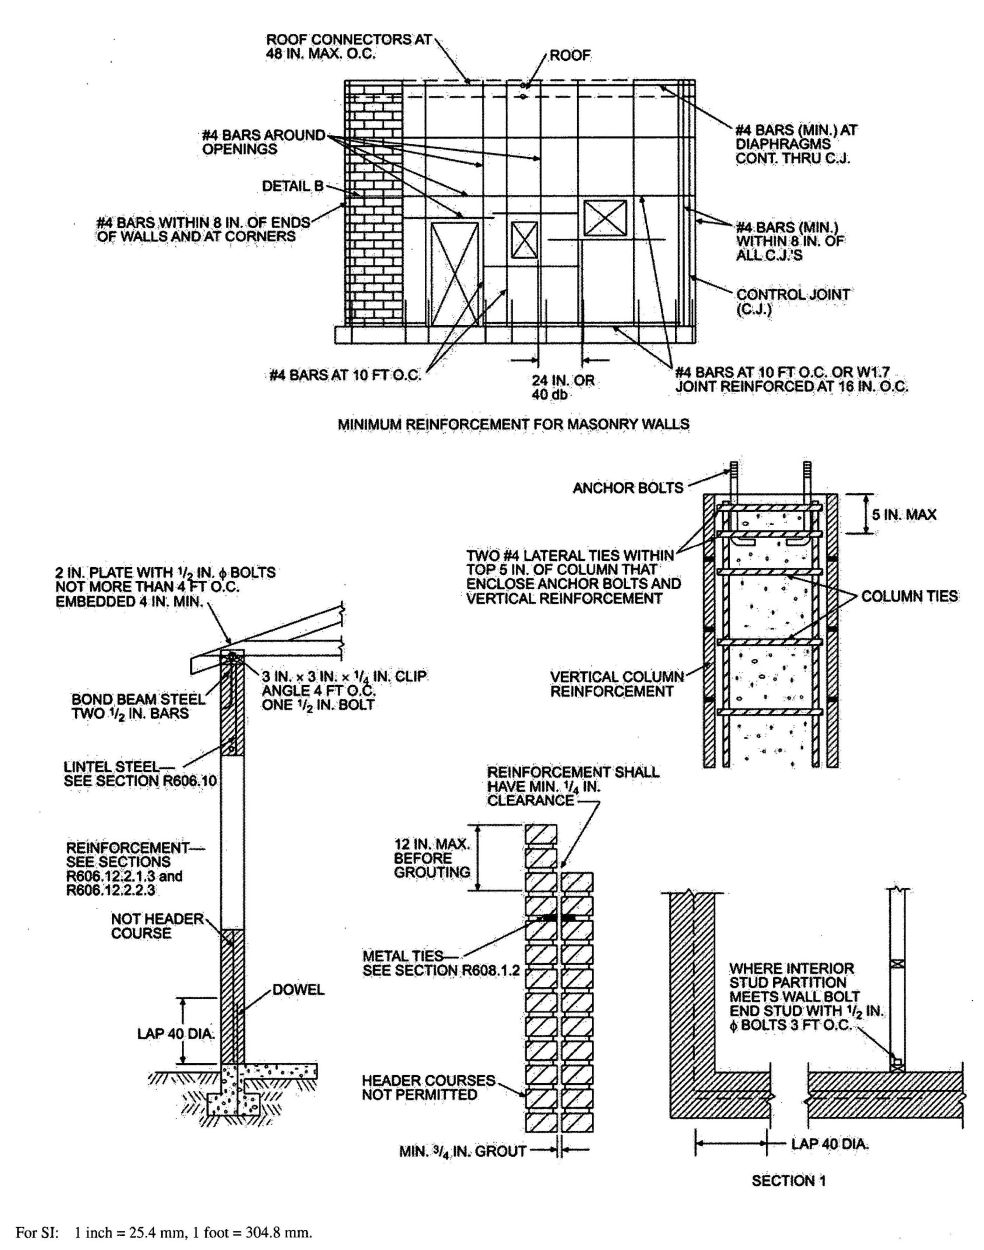 FIGURE R606.11(2) REQUIREMENTS FOR REINFORCED GROUTED MASONRY CONSTRUCTION IN SEISMIC DESIGN CATEGORY C